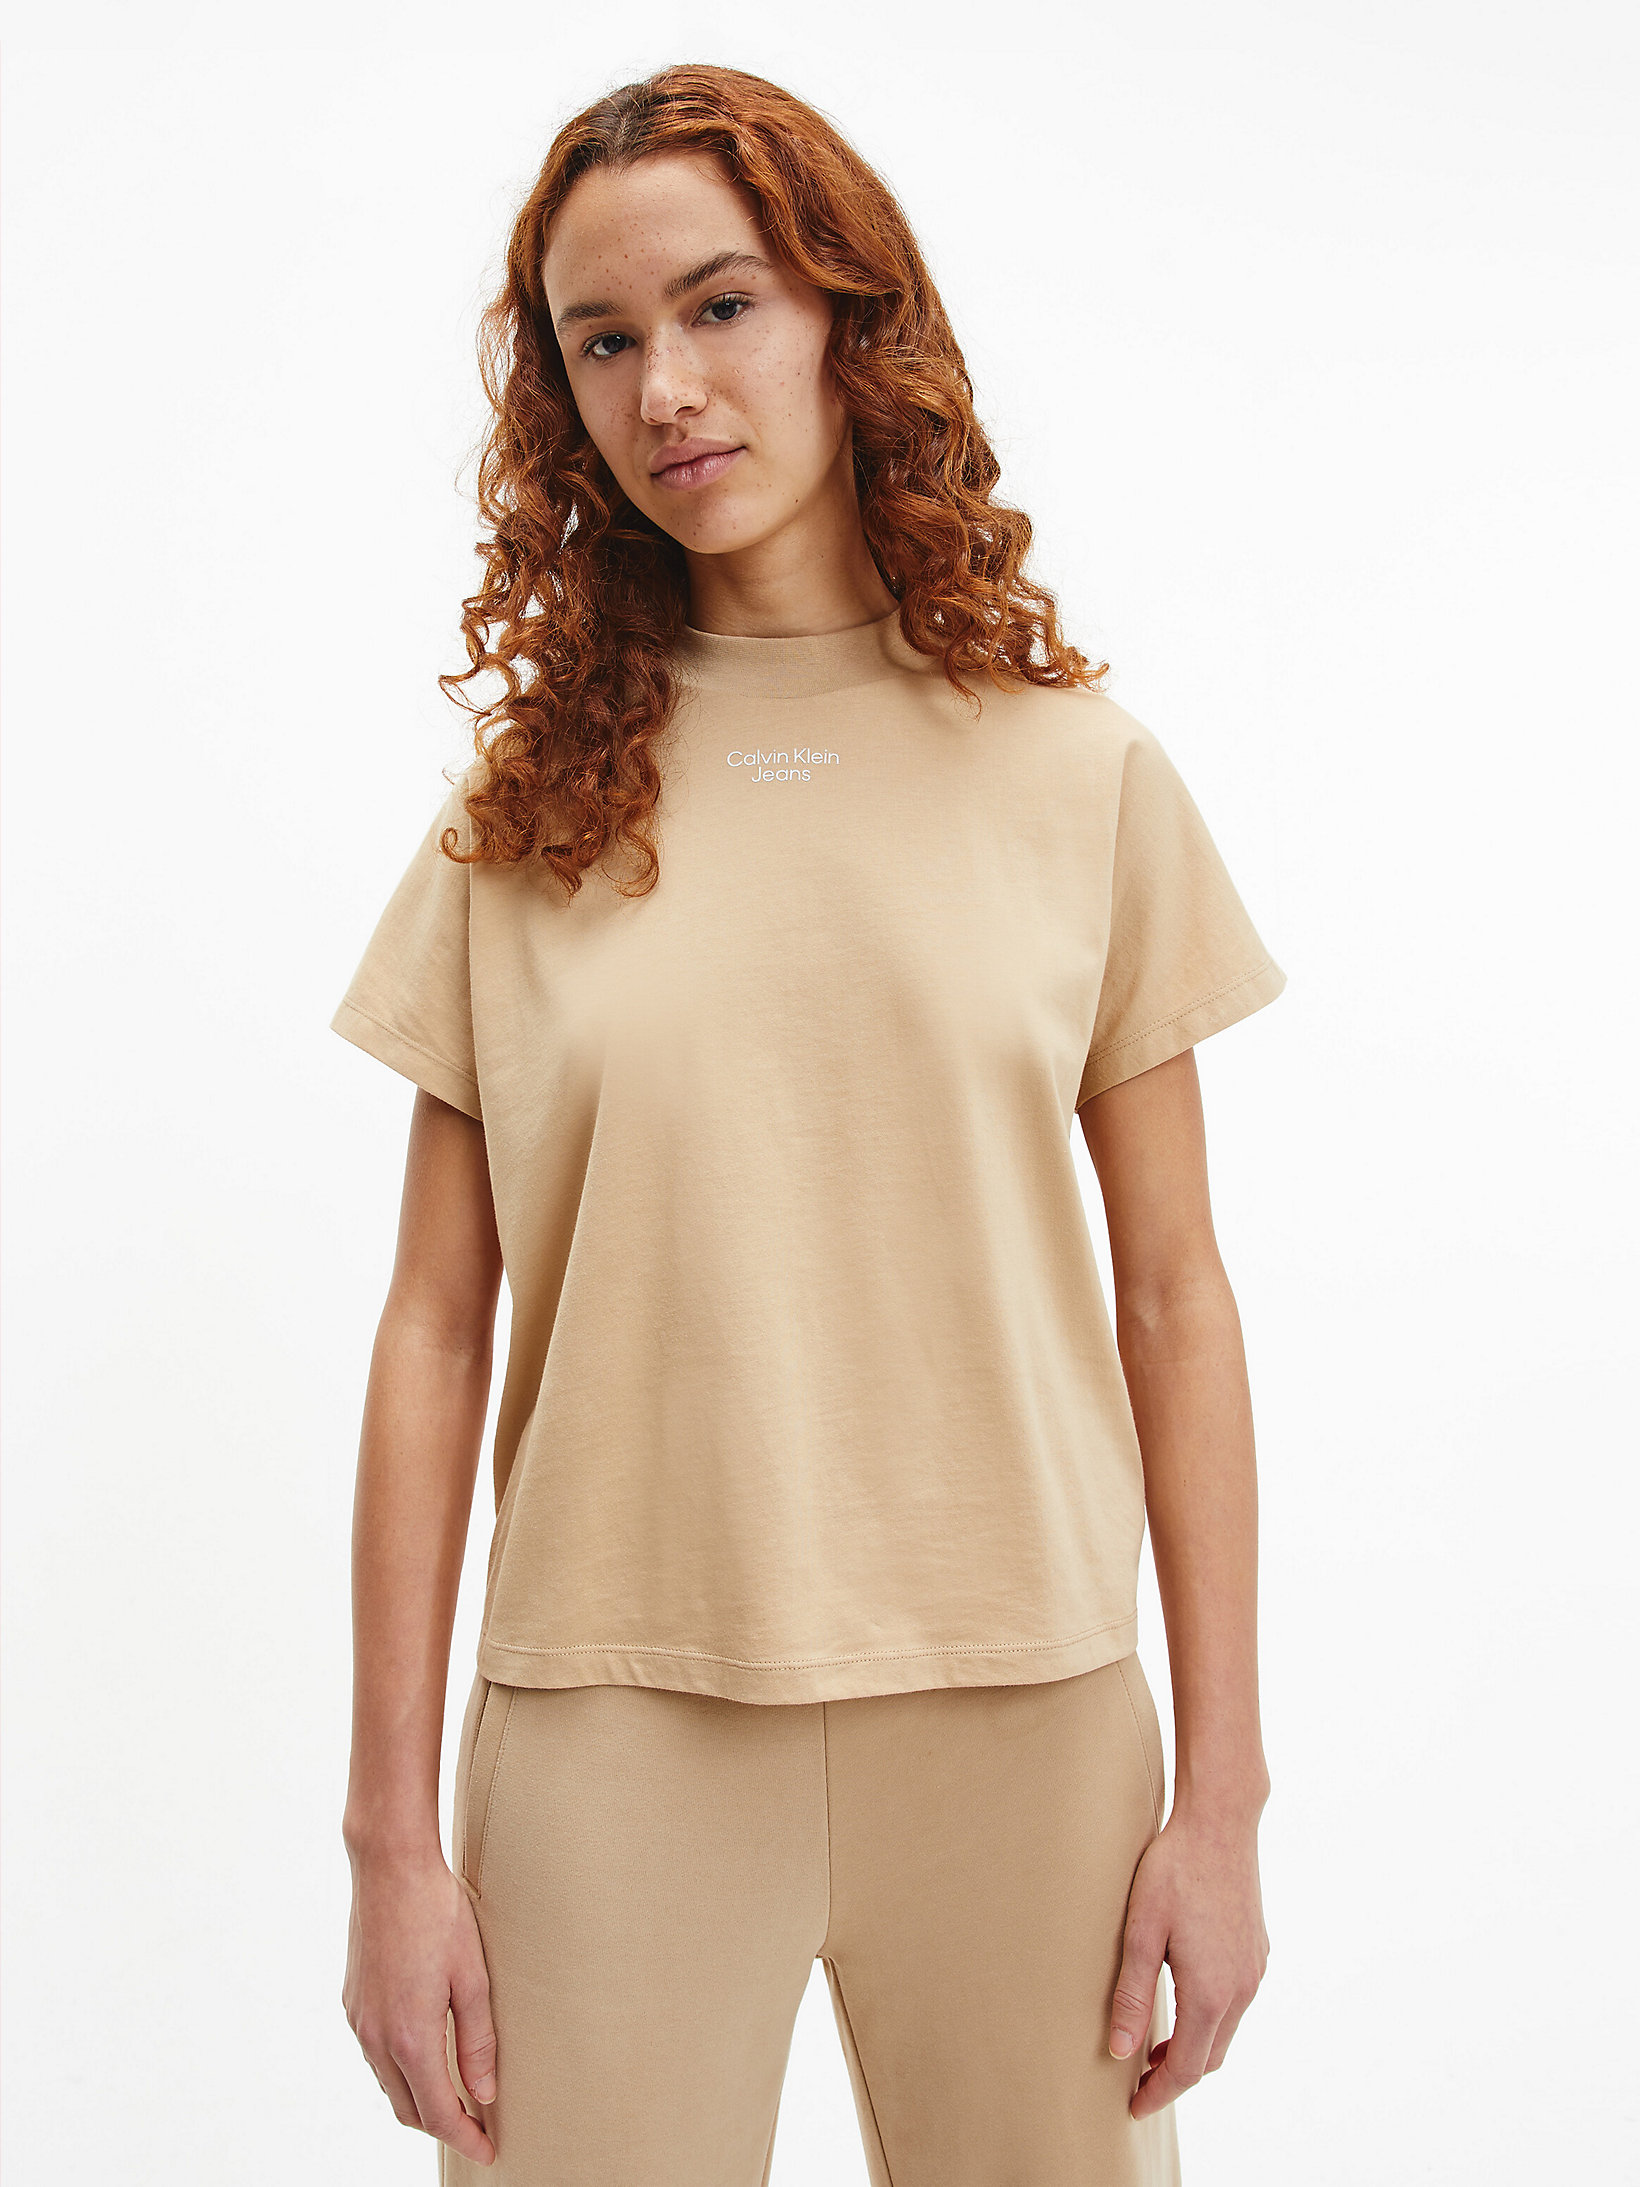 Tawny Sand Relaxed Organic Cotton T-Shirt undefined women Calvin Klein